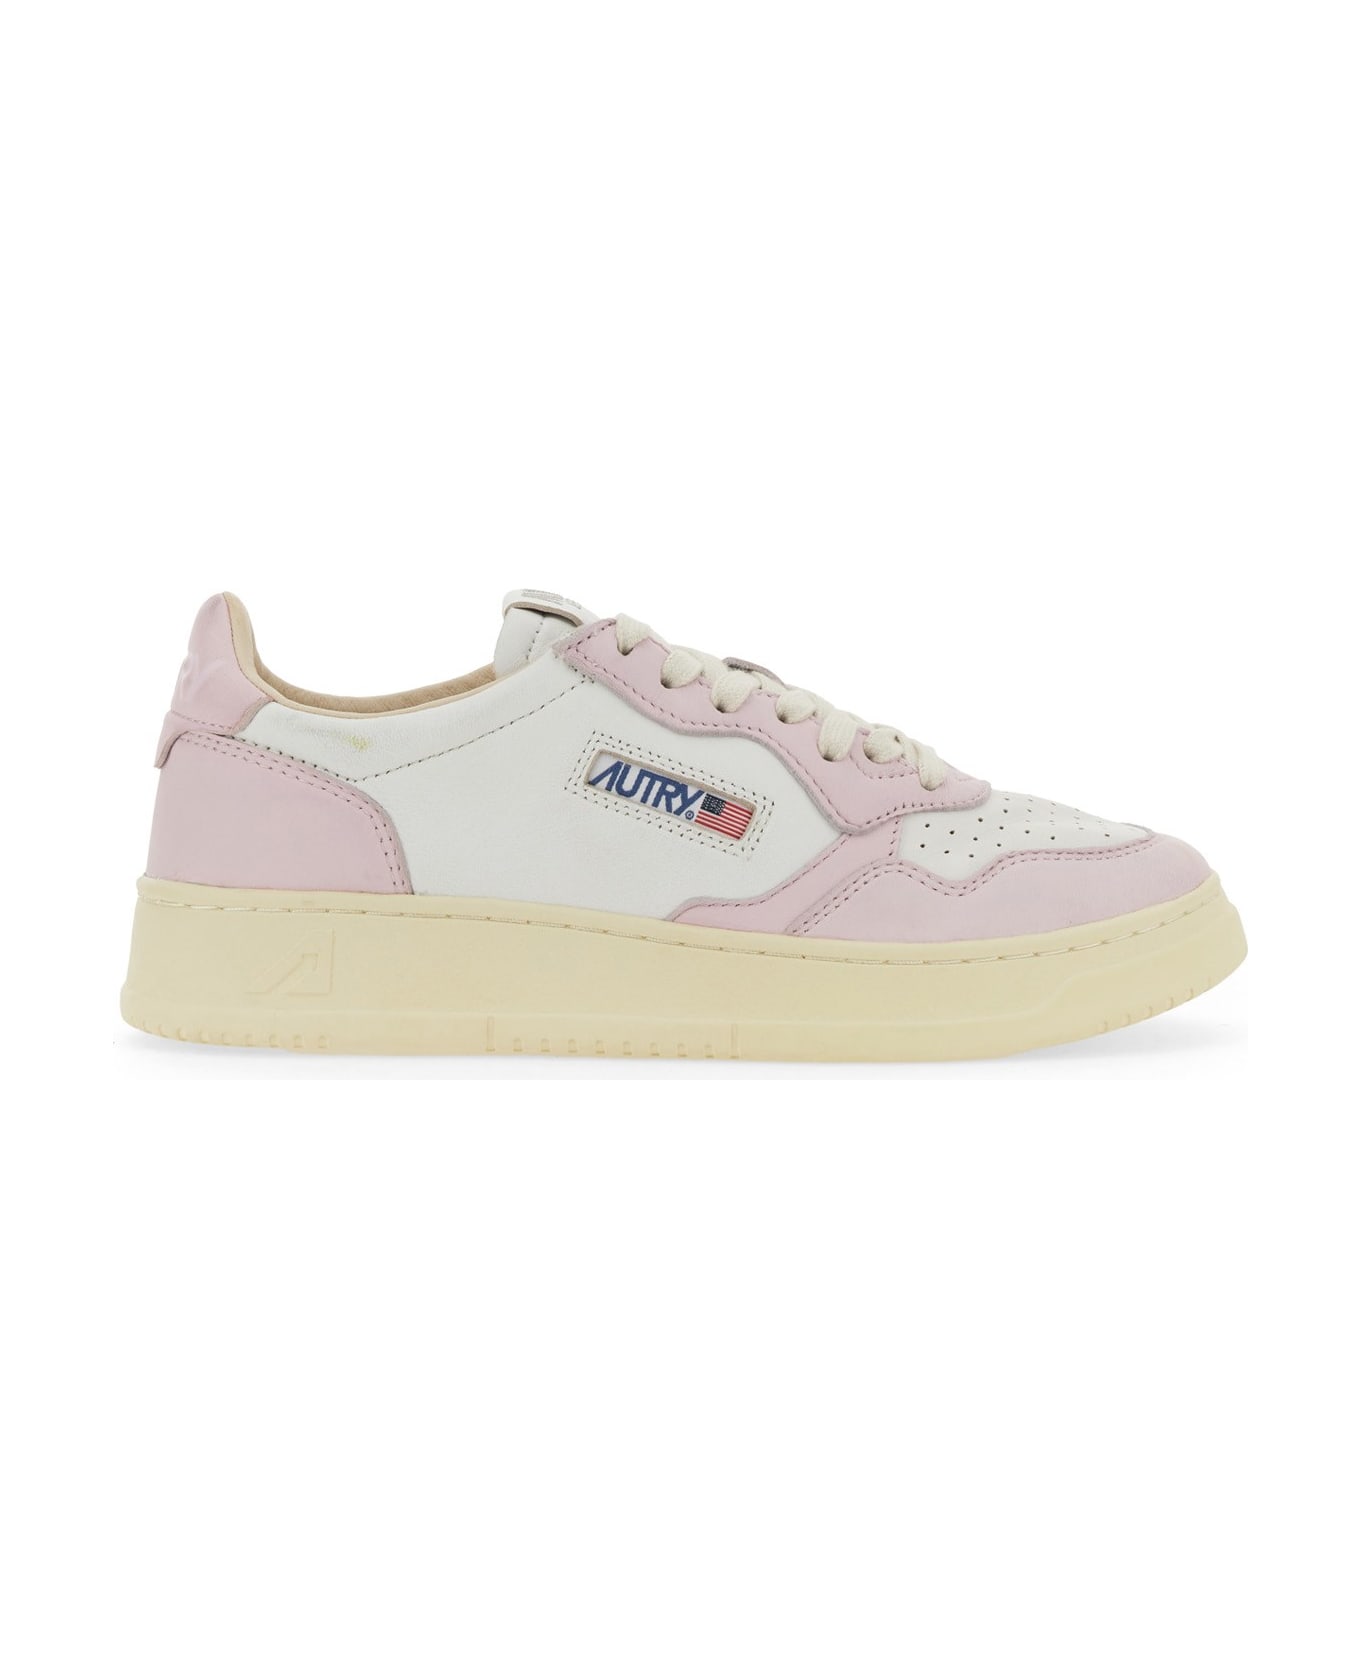 Autry Medalist Low Sneakers - Rose